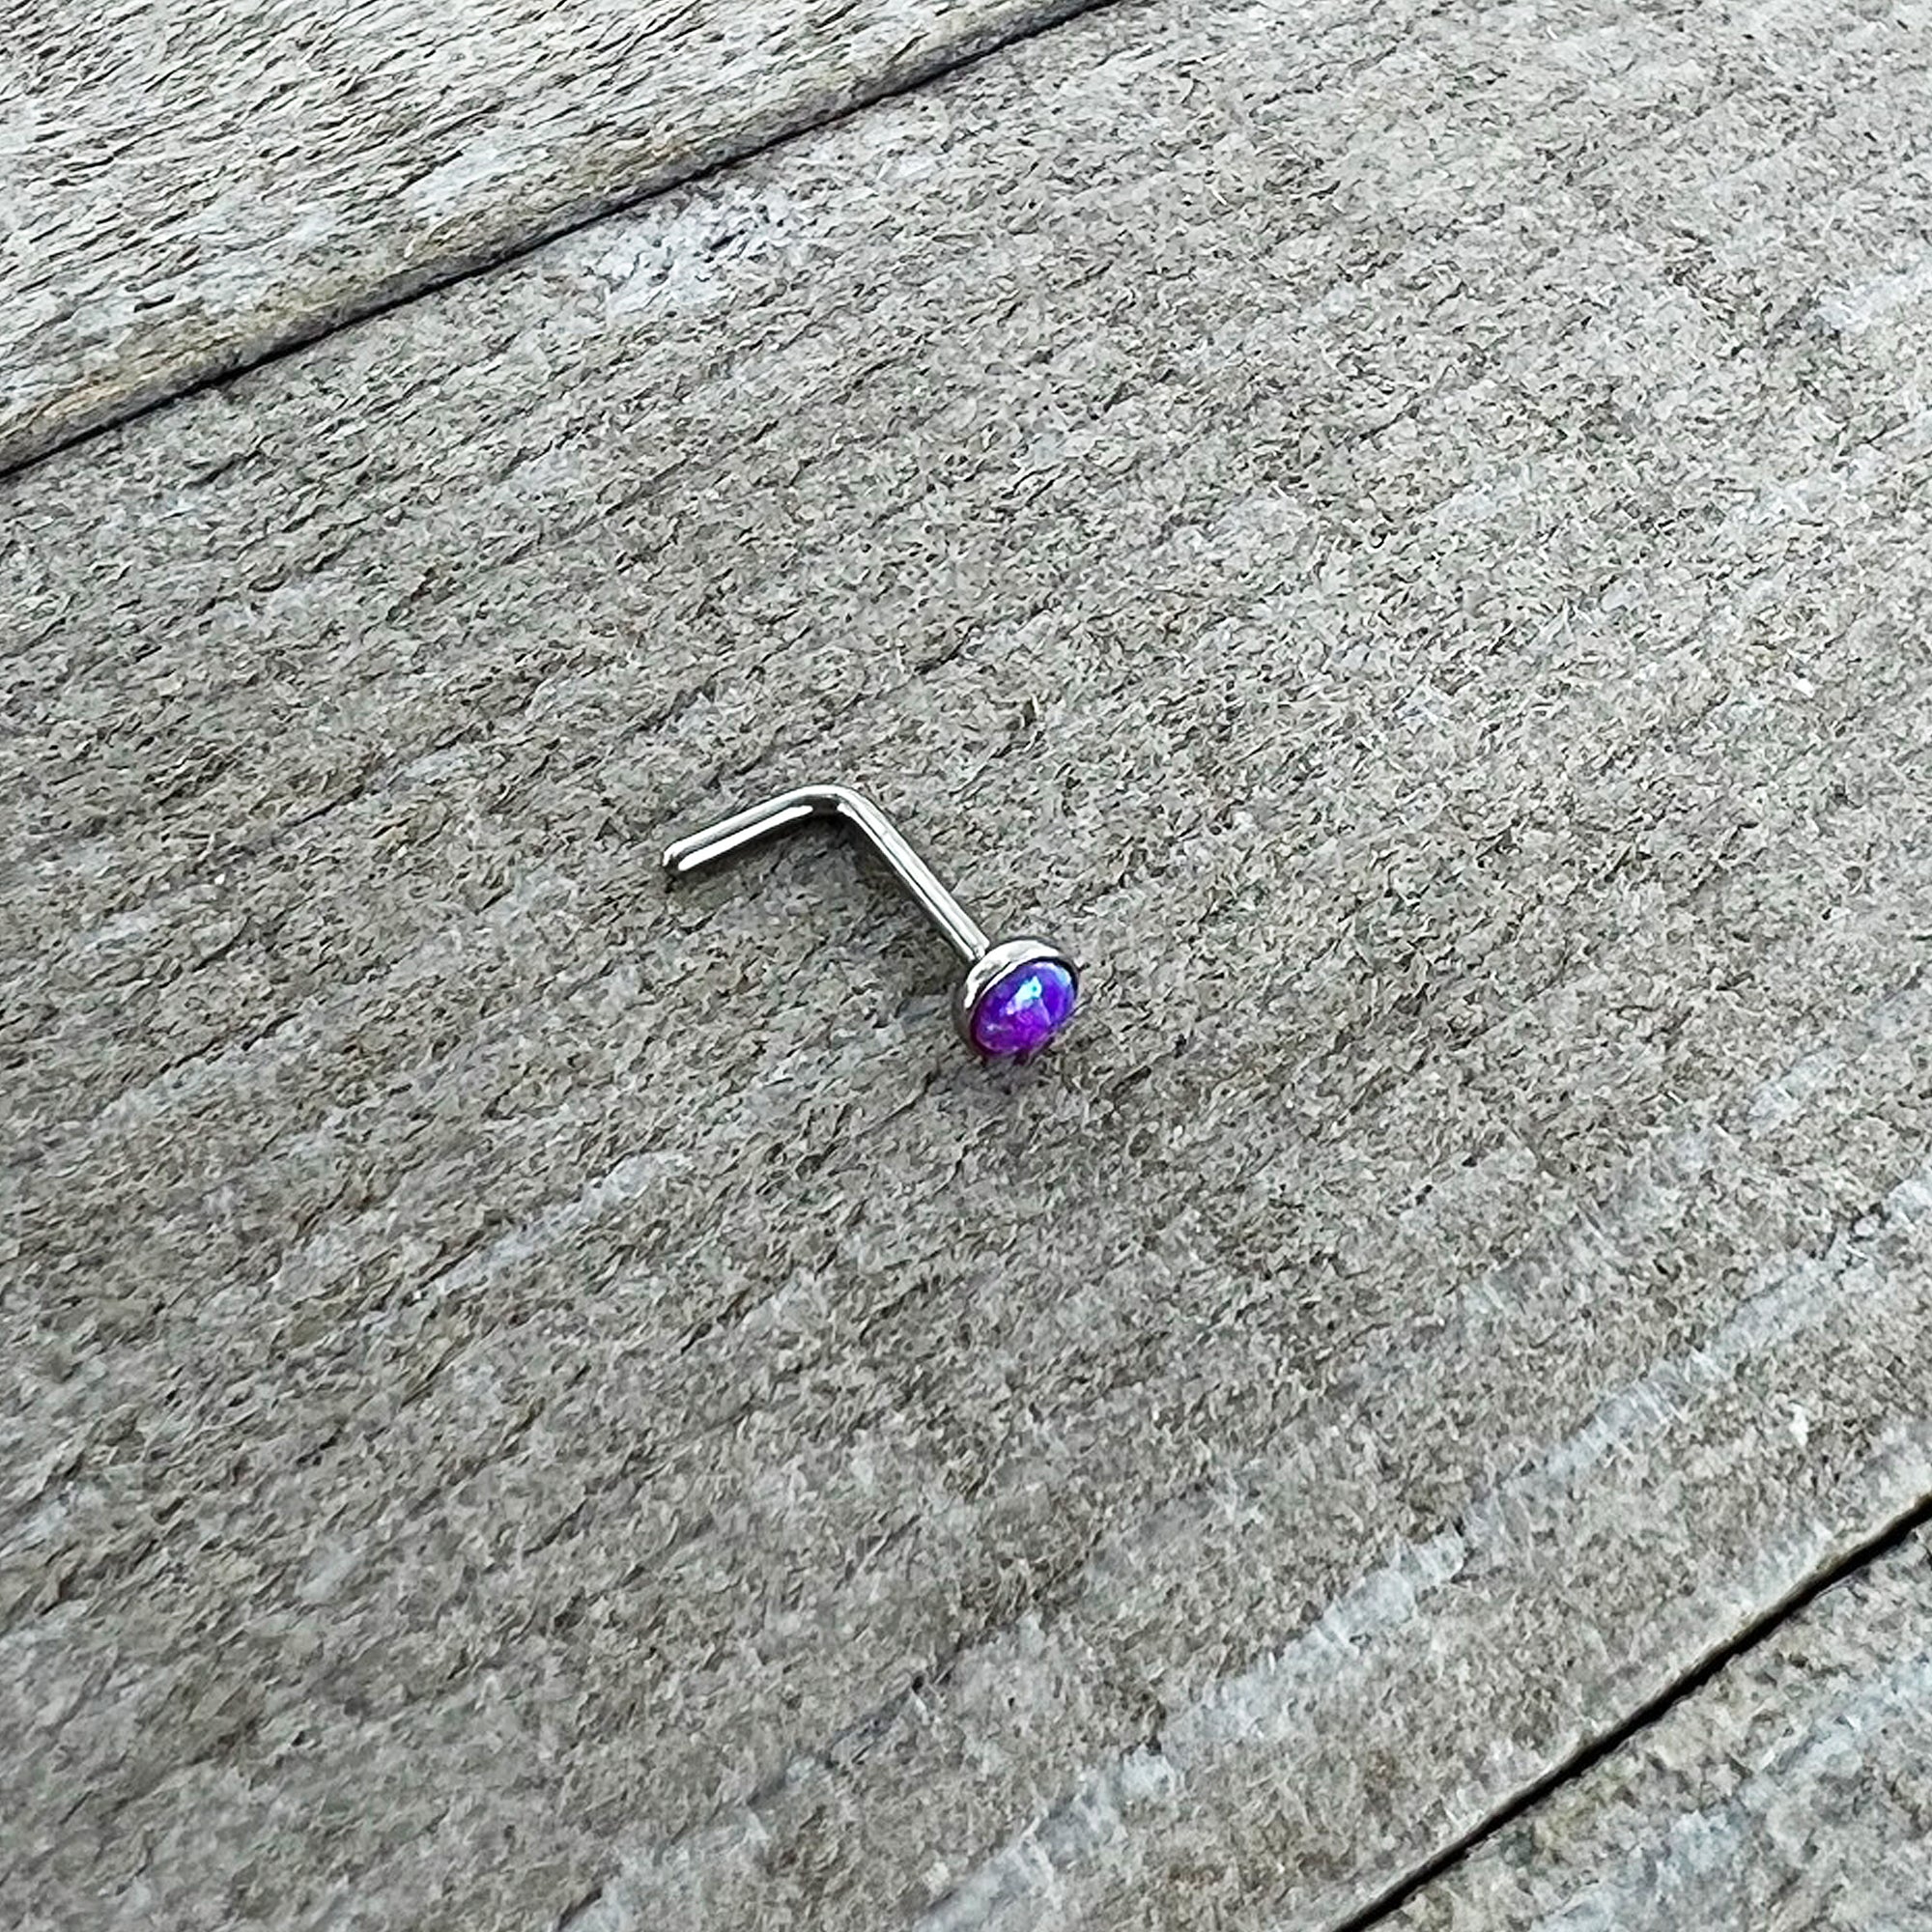 20 Gauge 2mm Purple Synthetic Opal L-Shaped Nose Ring